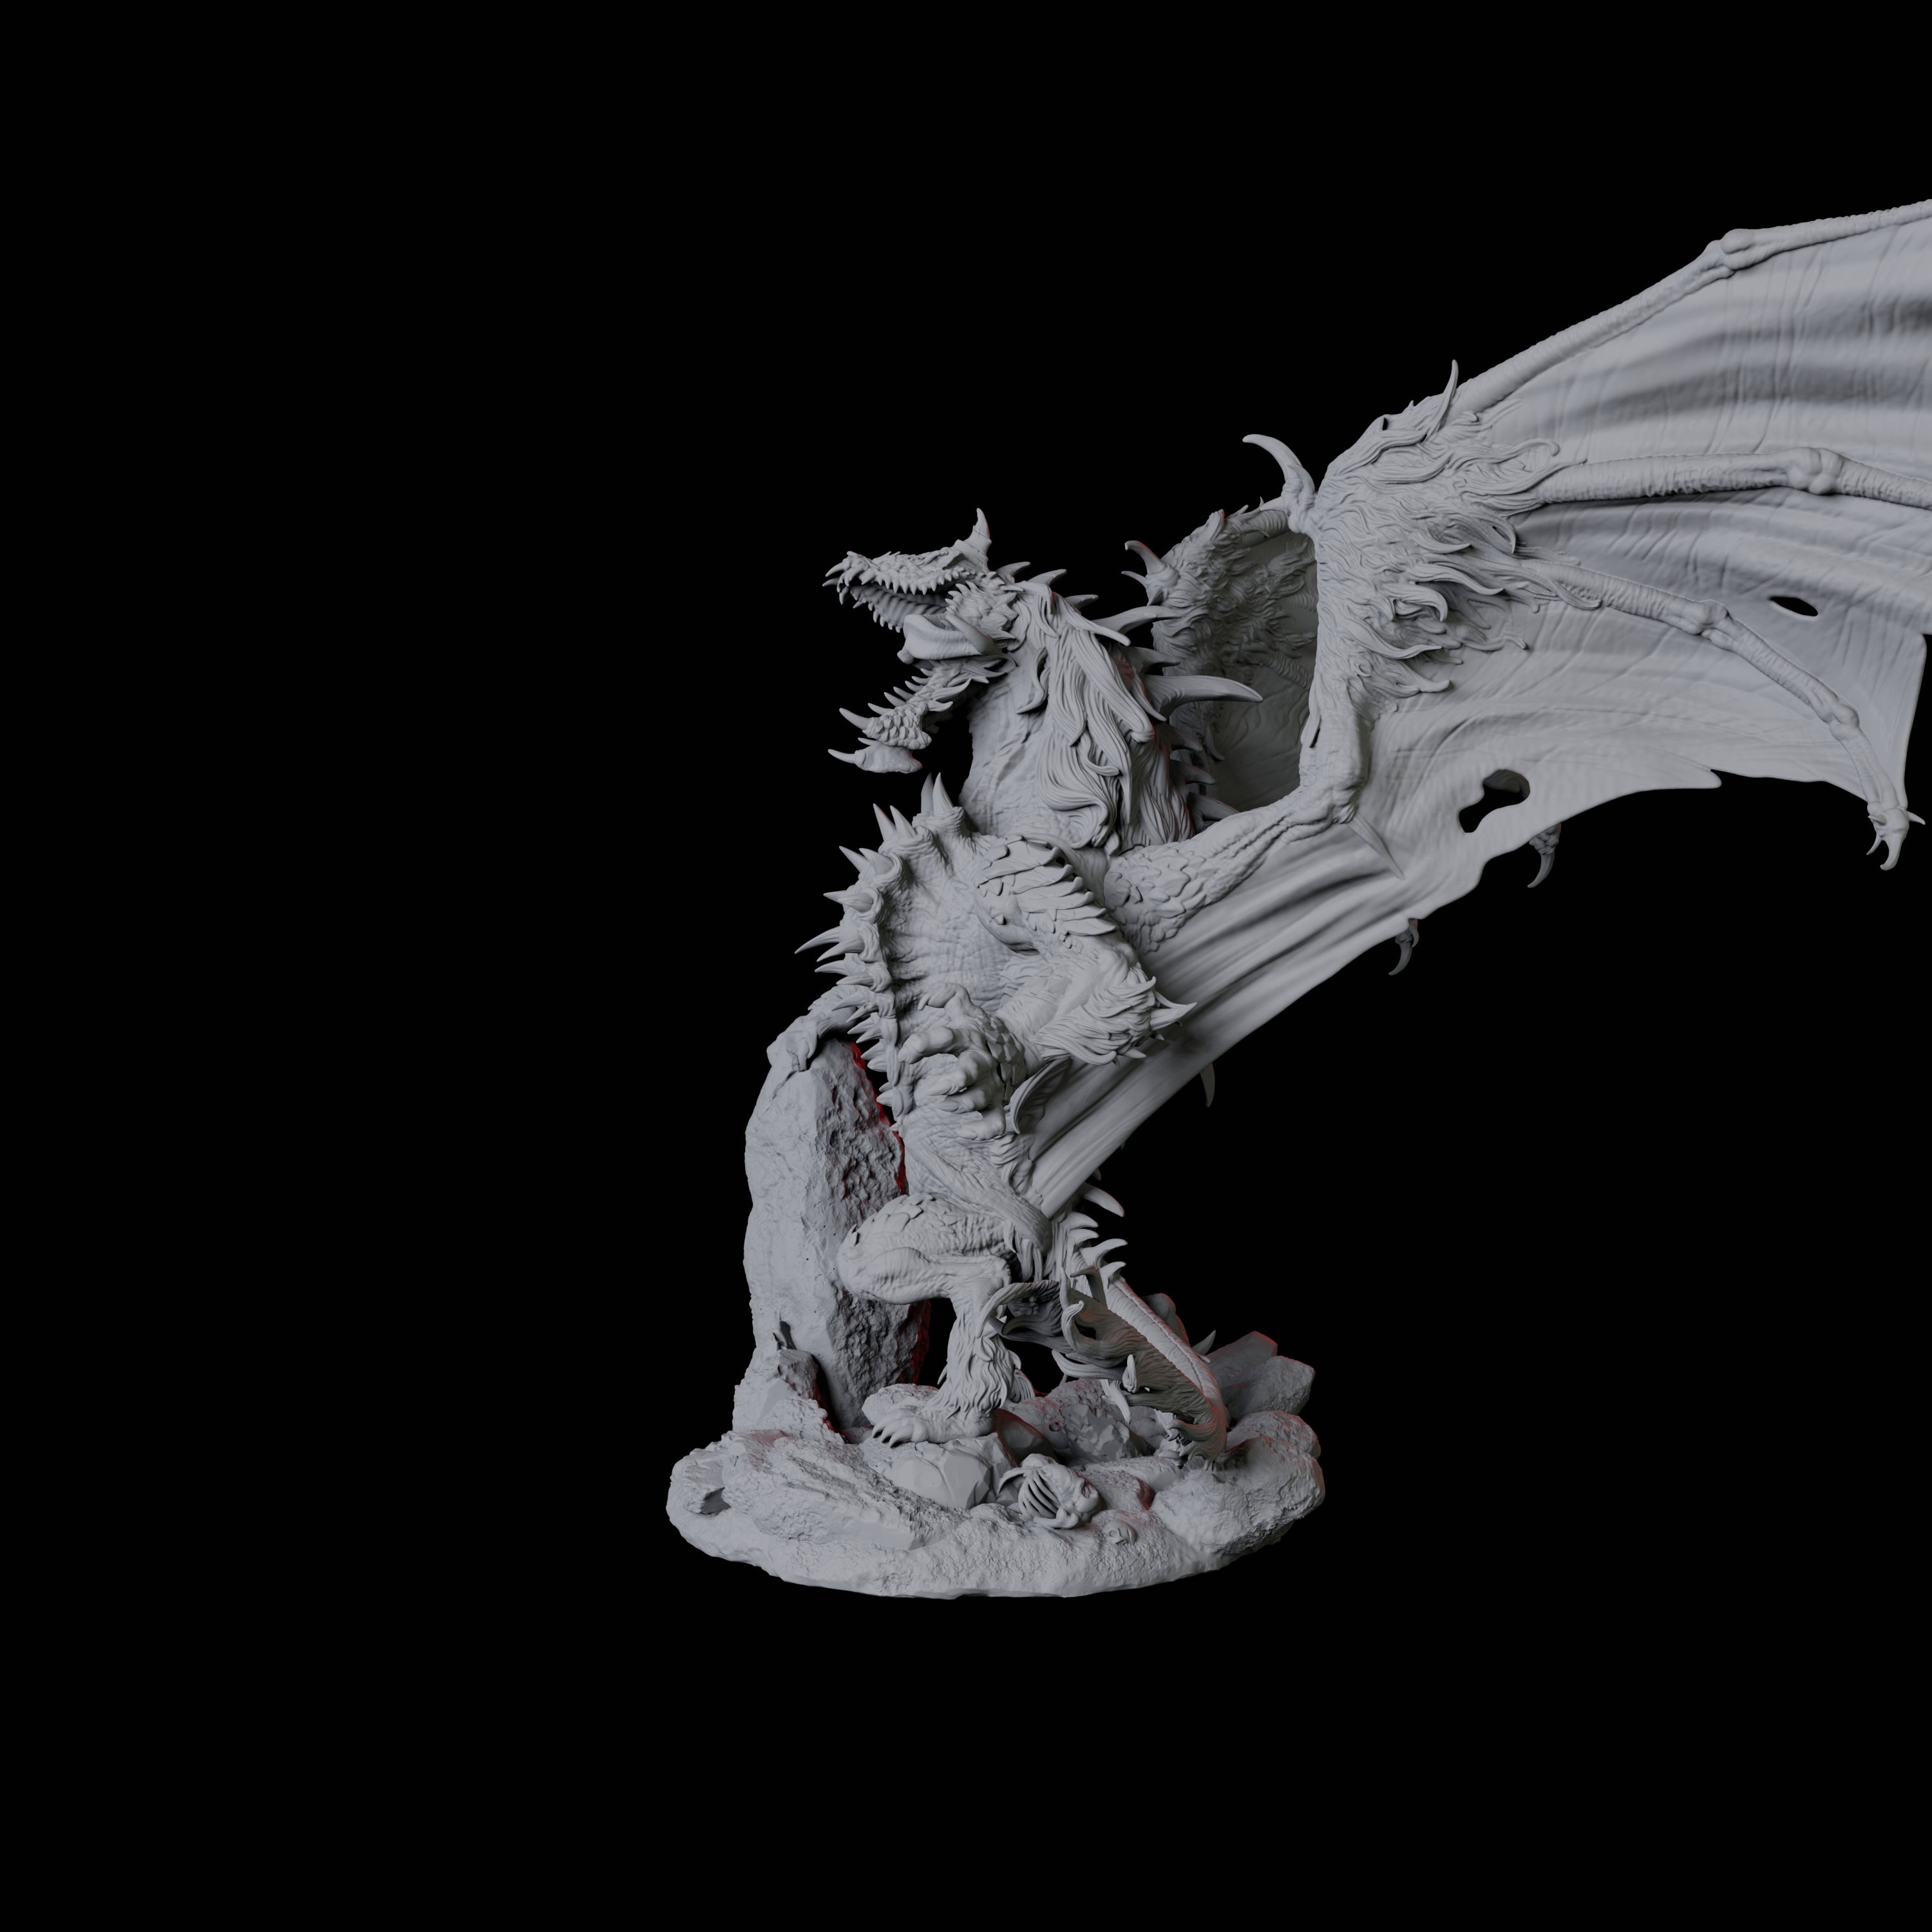 Hyena Dragon Miniature for Dungeons and Dragons, Pathfinder or other TTRPGs